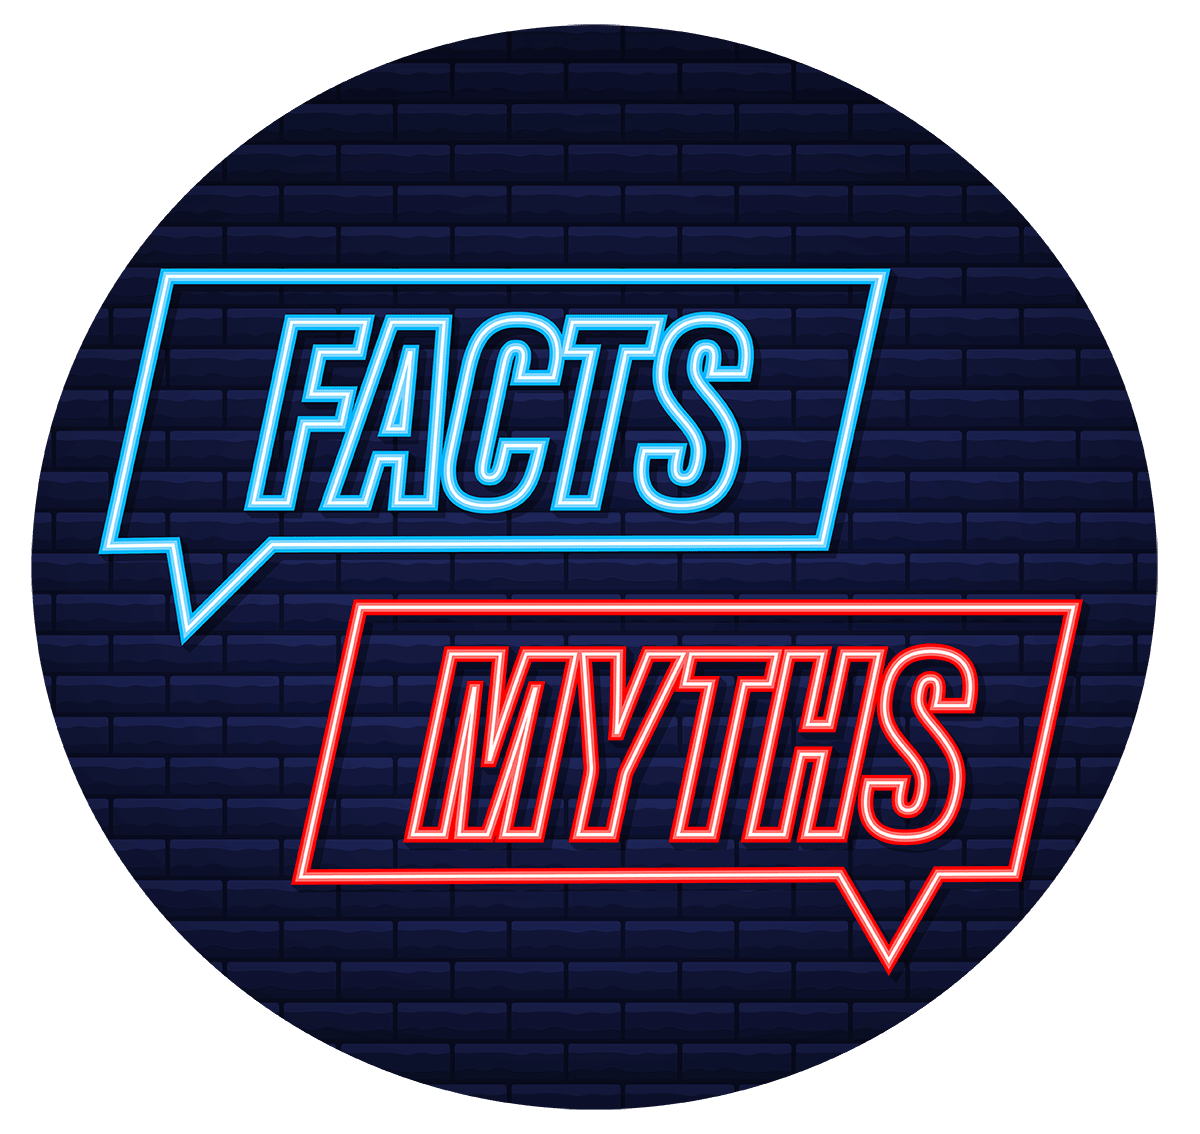 Cybersecurity maturity starts with knowing that cybersecurity myths are illusions and then implementing the appropriate measures to ensure proper protection of data from cyber threats.